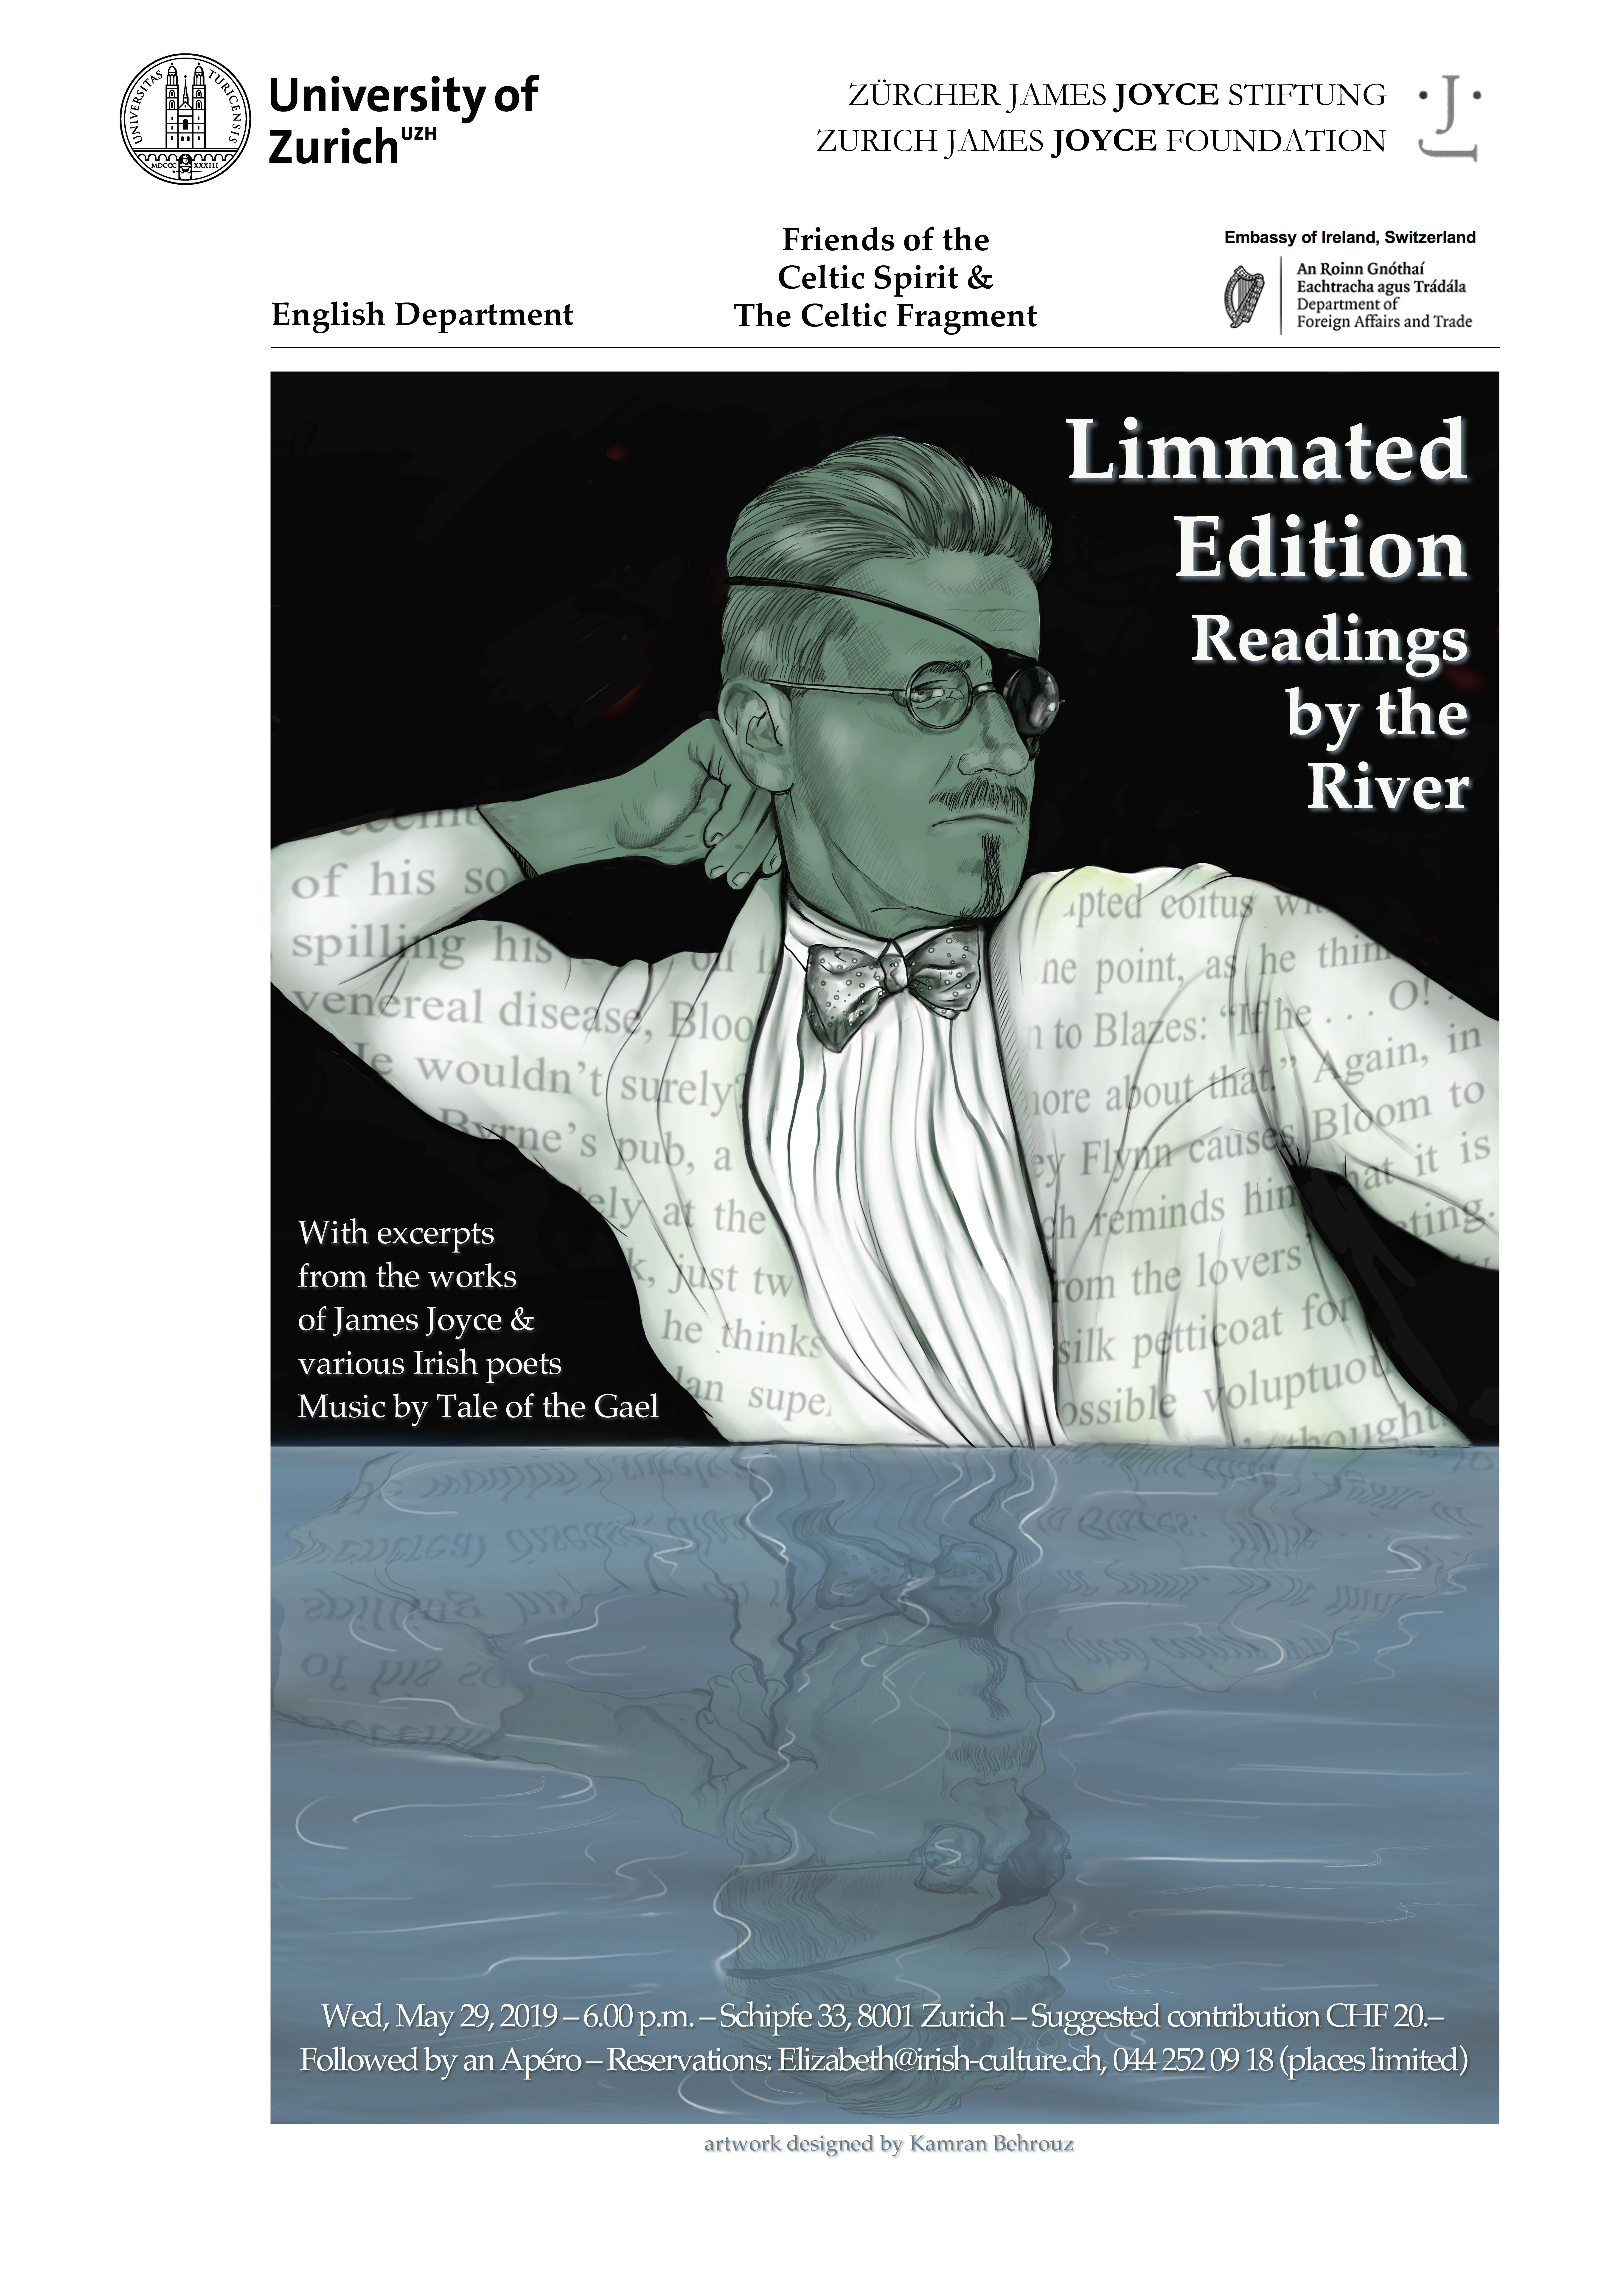 Limmated Edition: Readings by the River, with Excerpts from the Work of James Joyce & Various Irish Poets